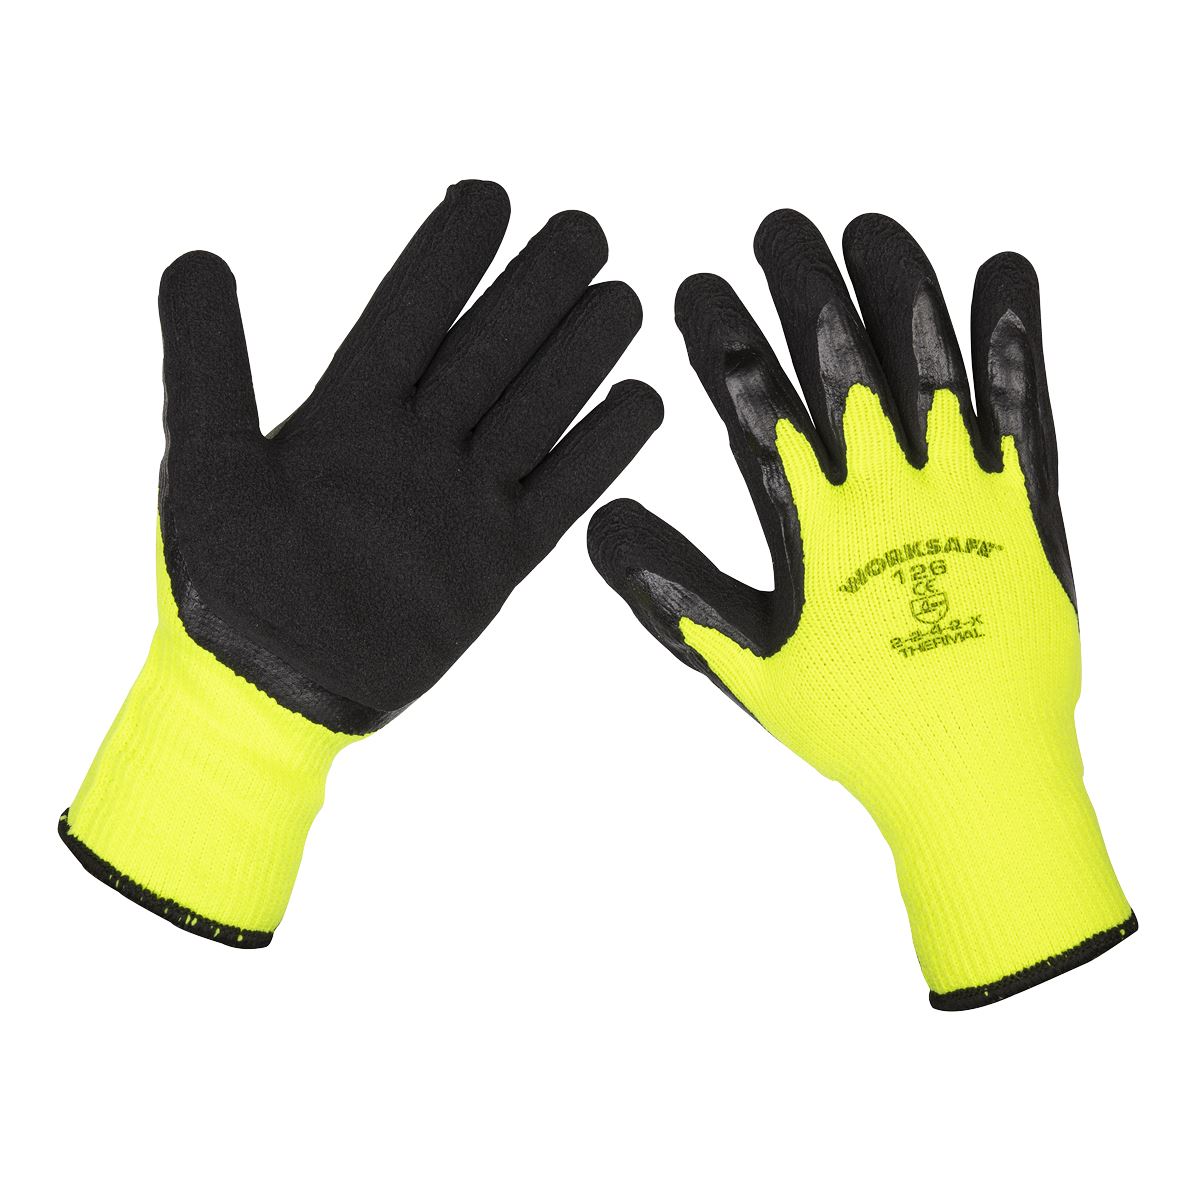 Worksafe by Sealey Thermal Super Grip Gloves (Large) - Pair